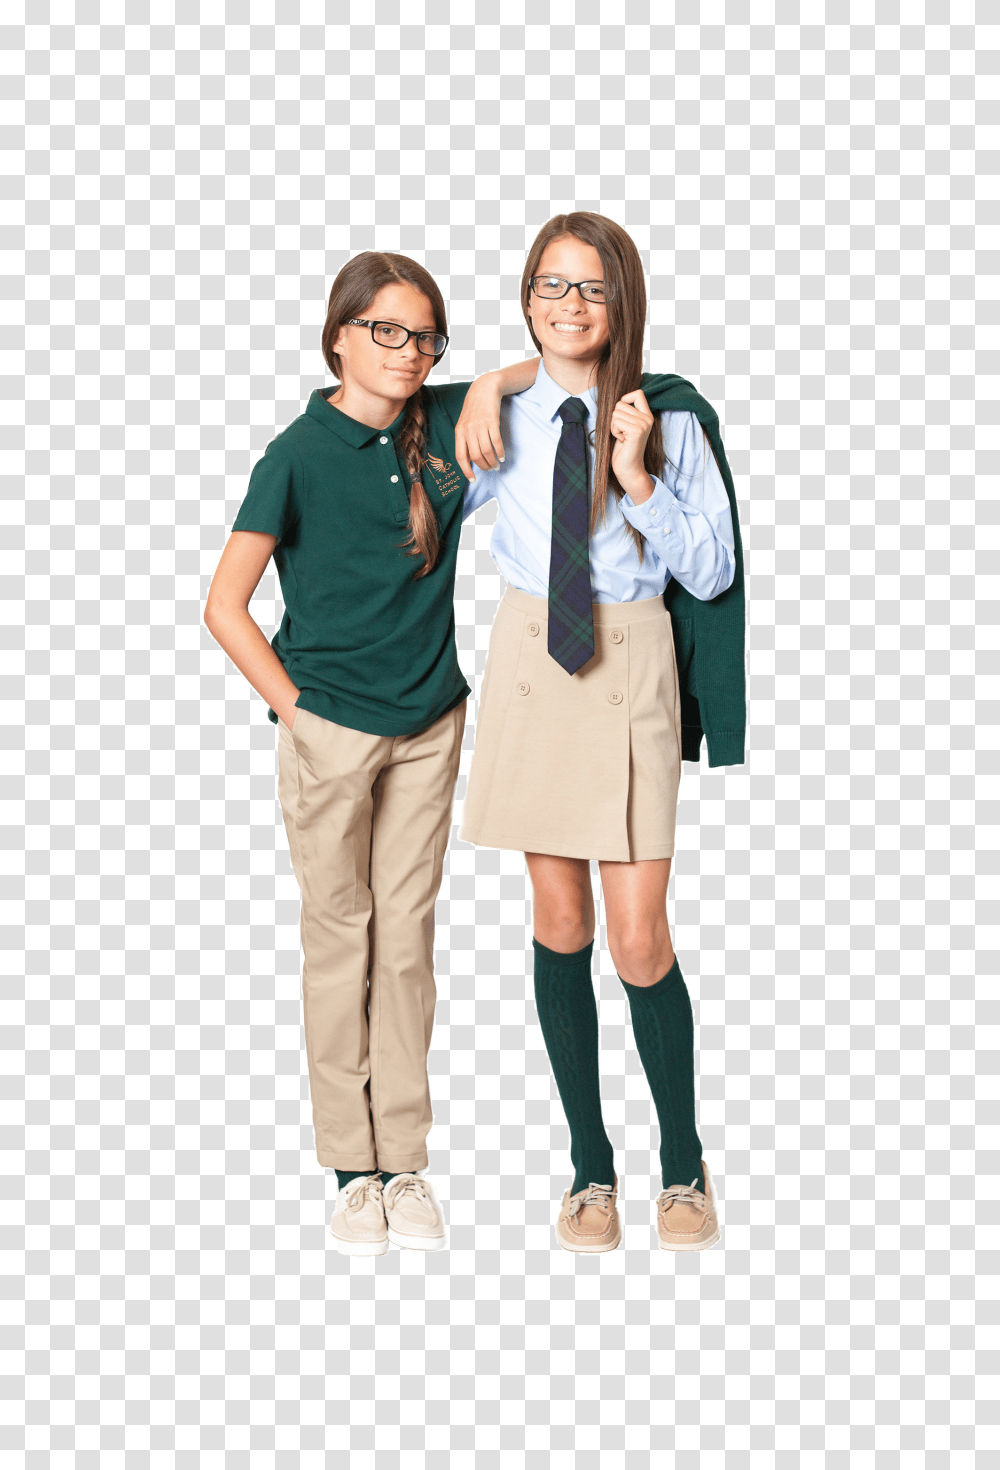 Chapel Dress Day Students In Uniform Photoshop, Tie, Person, Sleeve Transparent Png